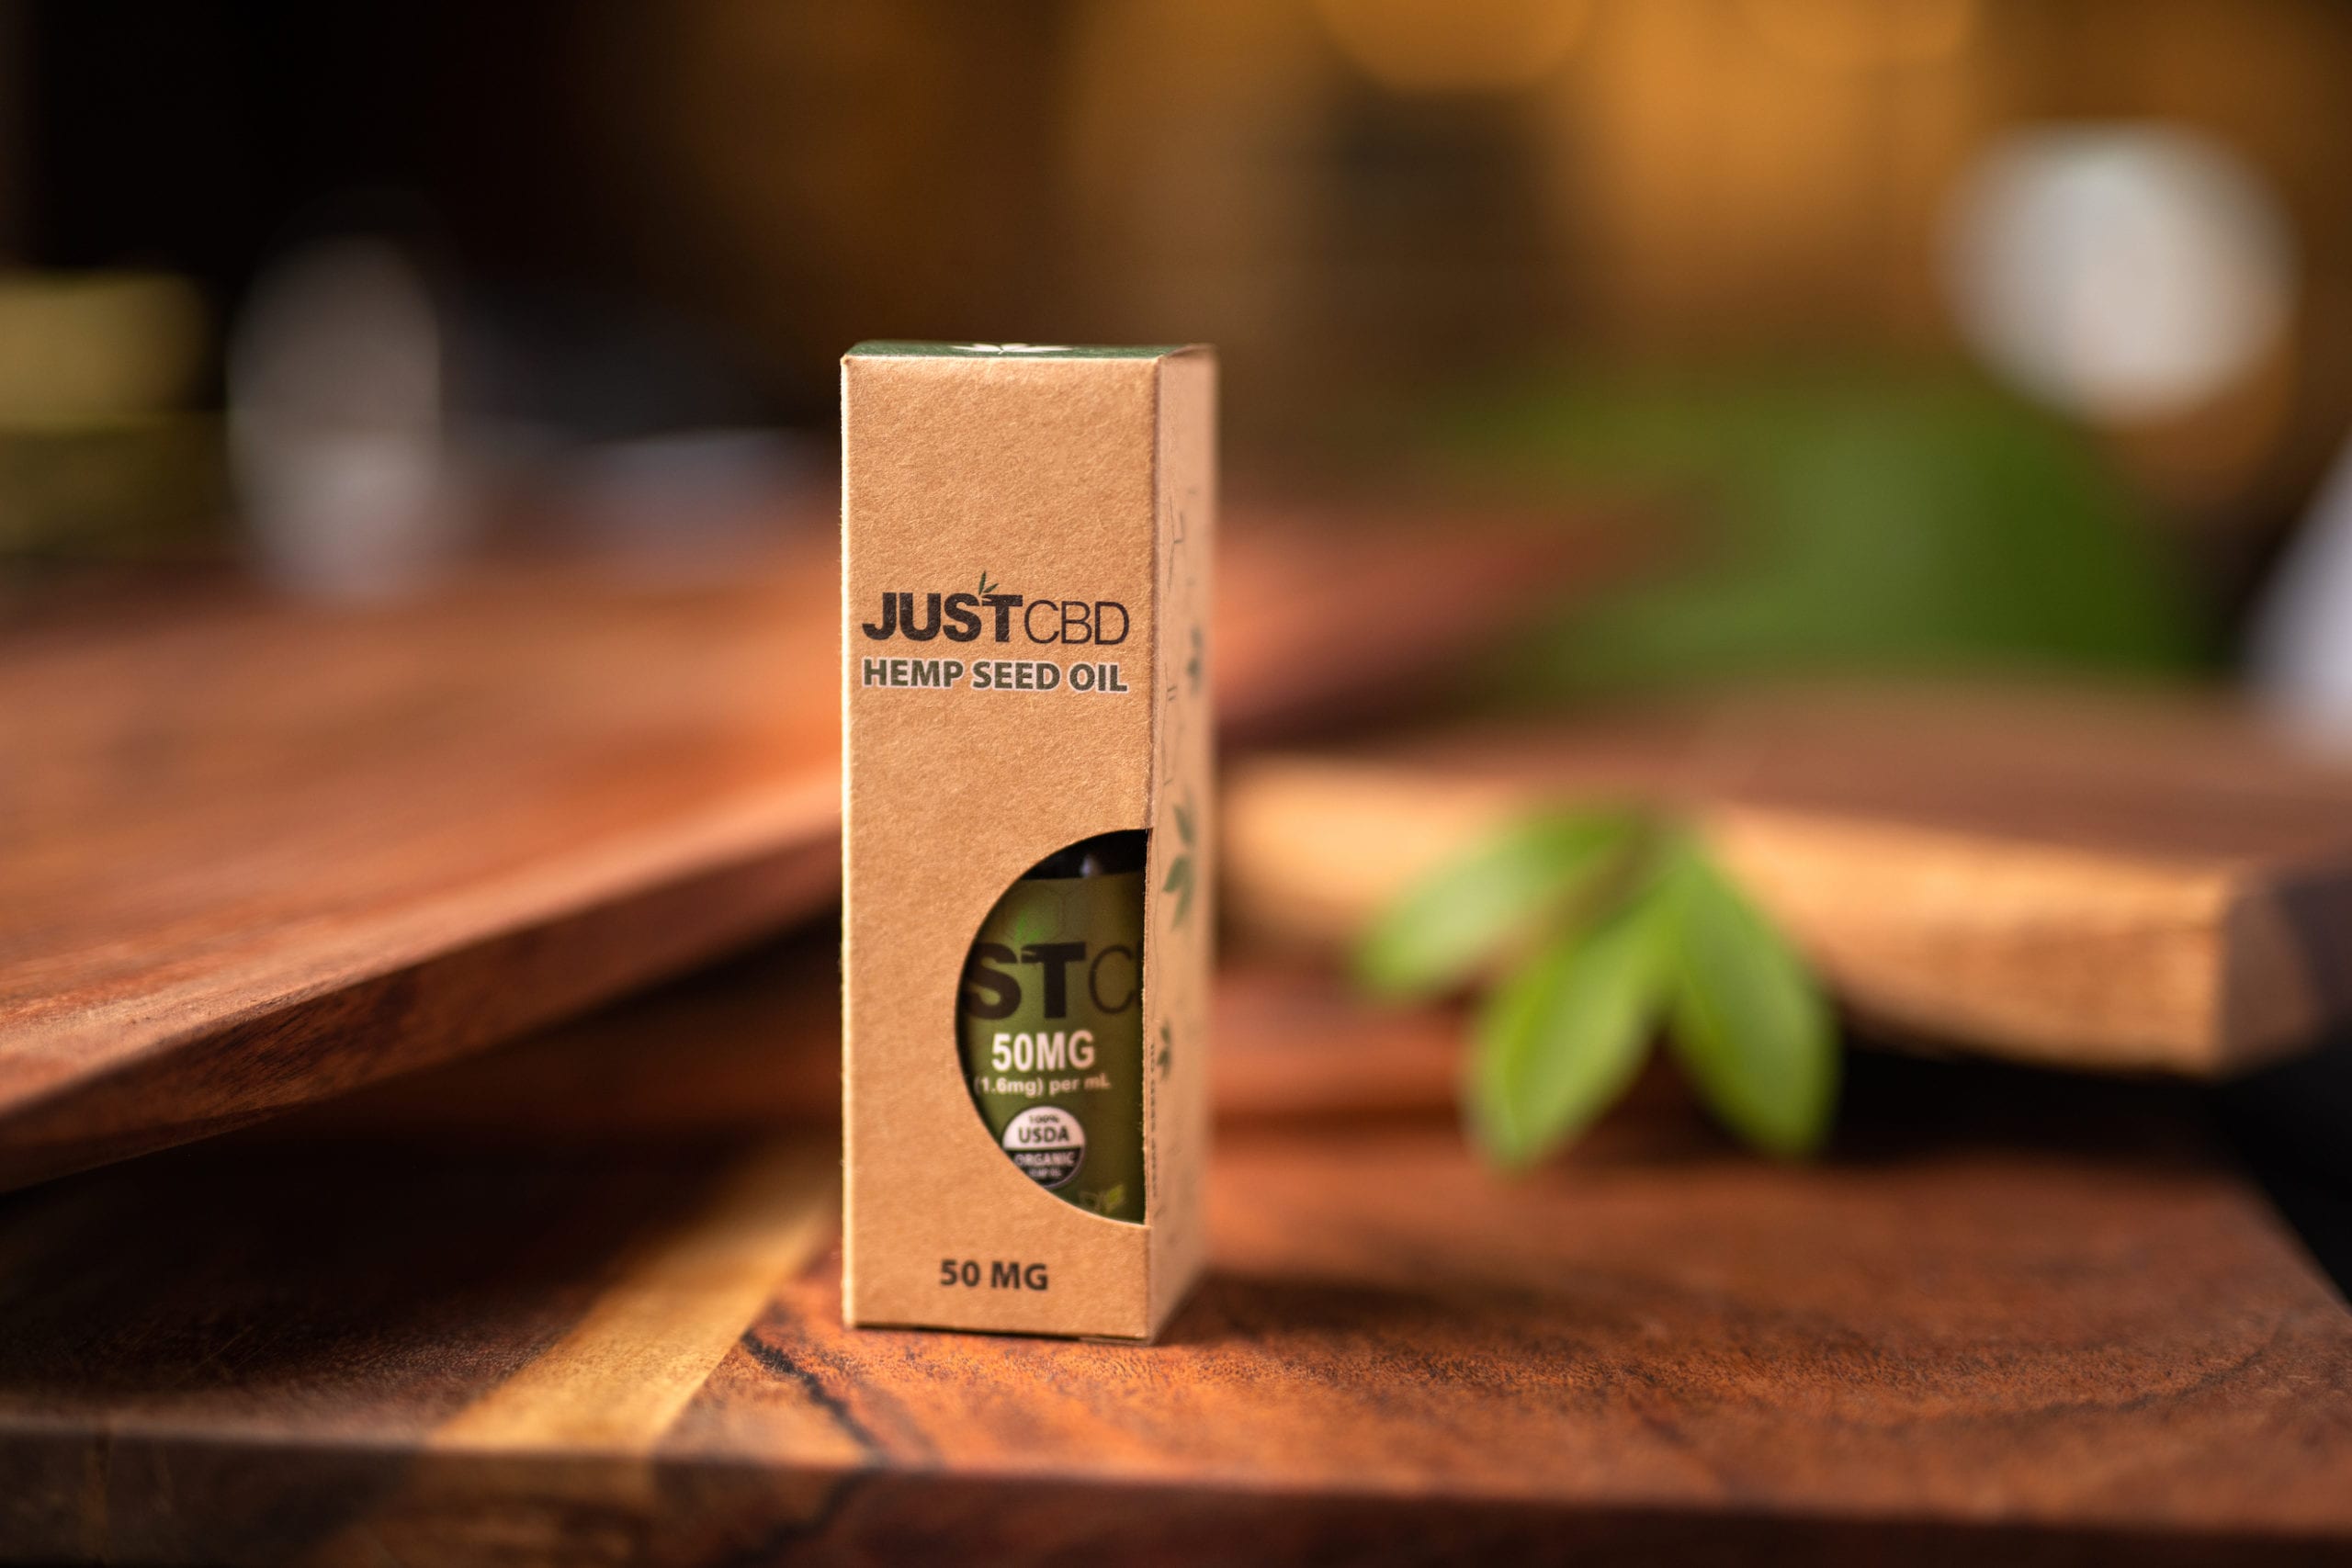 JustCBD Hemp Seed Oil container on display on a wooden table